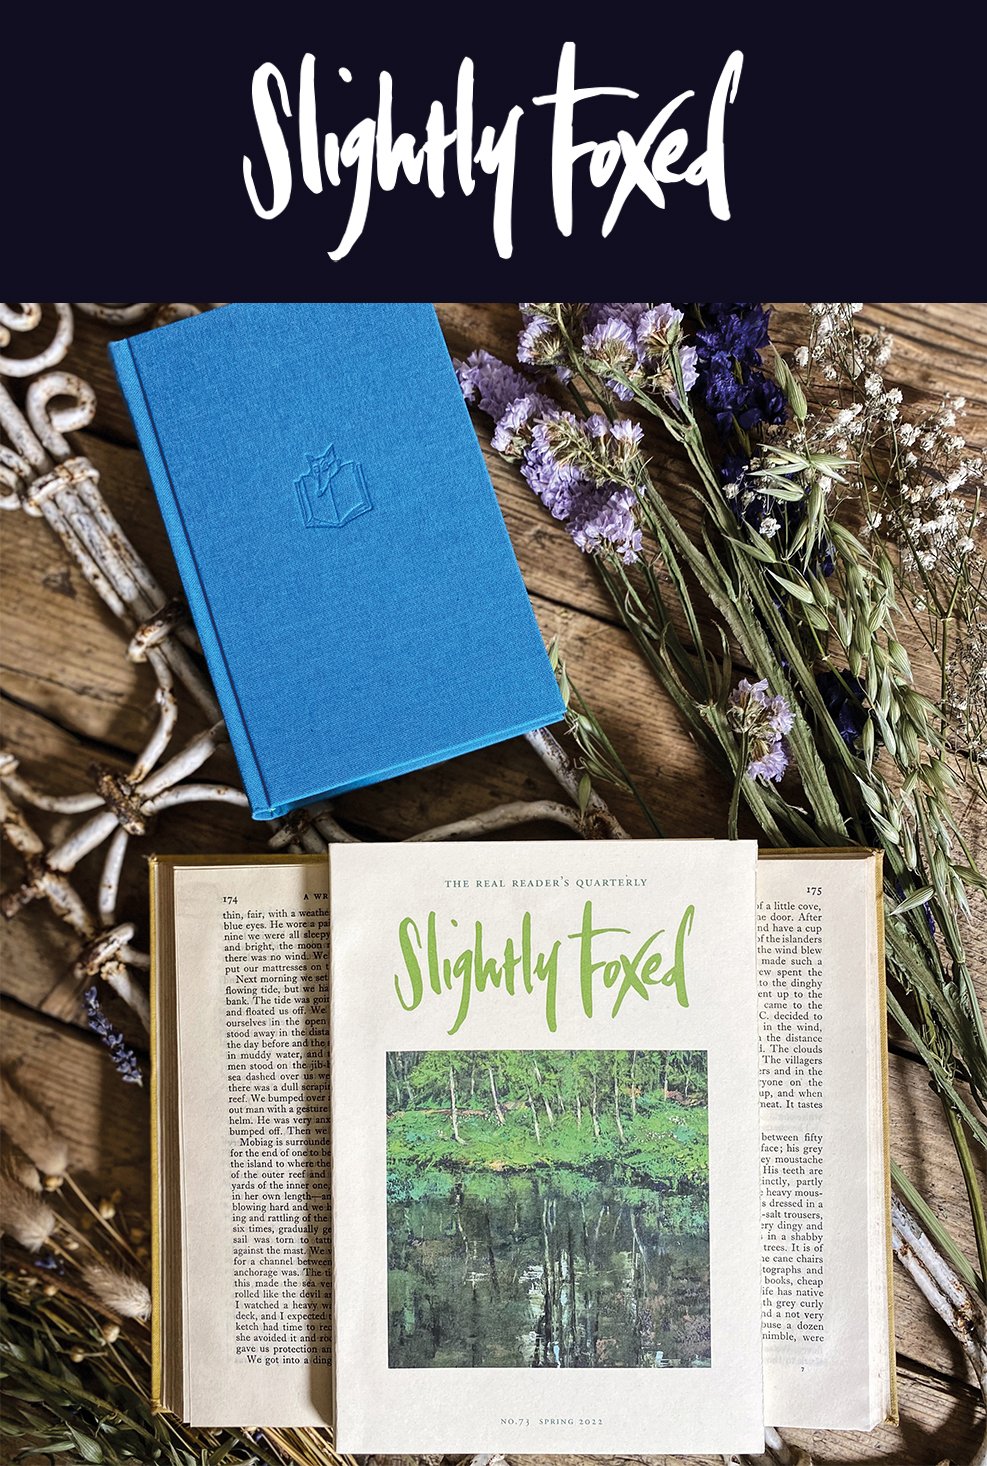 Slightly Foxed Magazine | Issue 73 | New this spring